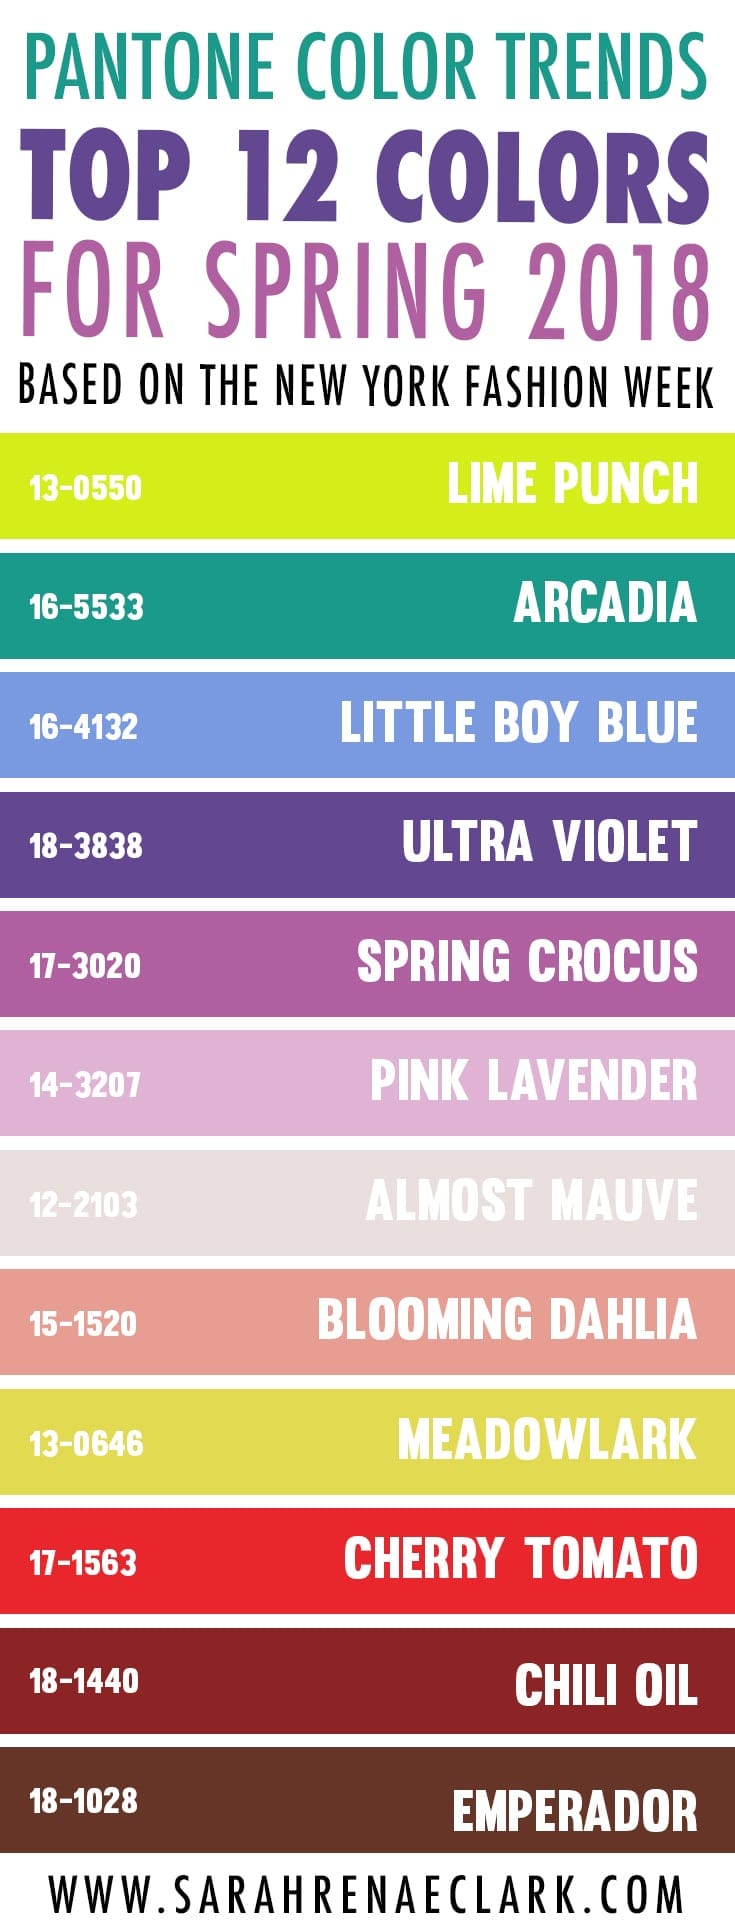 Pantone's Spring 2018 Color Trend Forecast - Check out these 25 color palettes inspired by the Pantone colors for Spring! #color #pantone